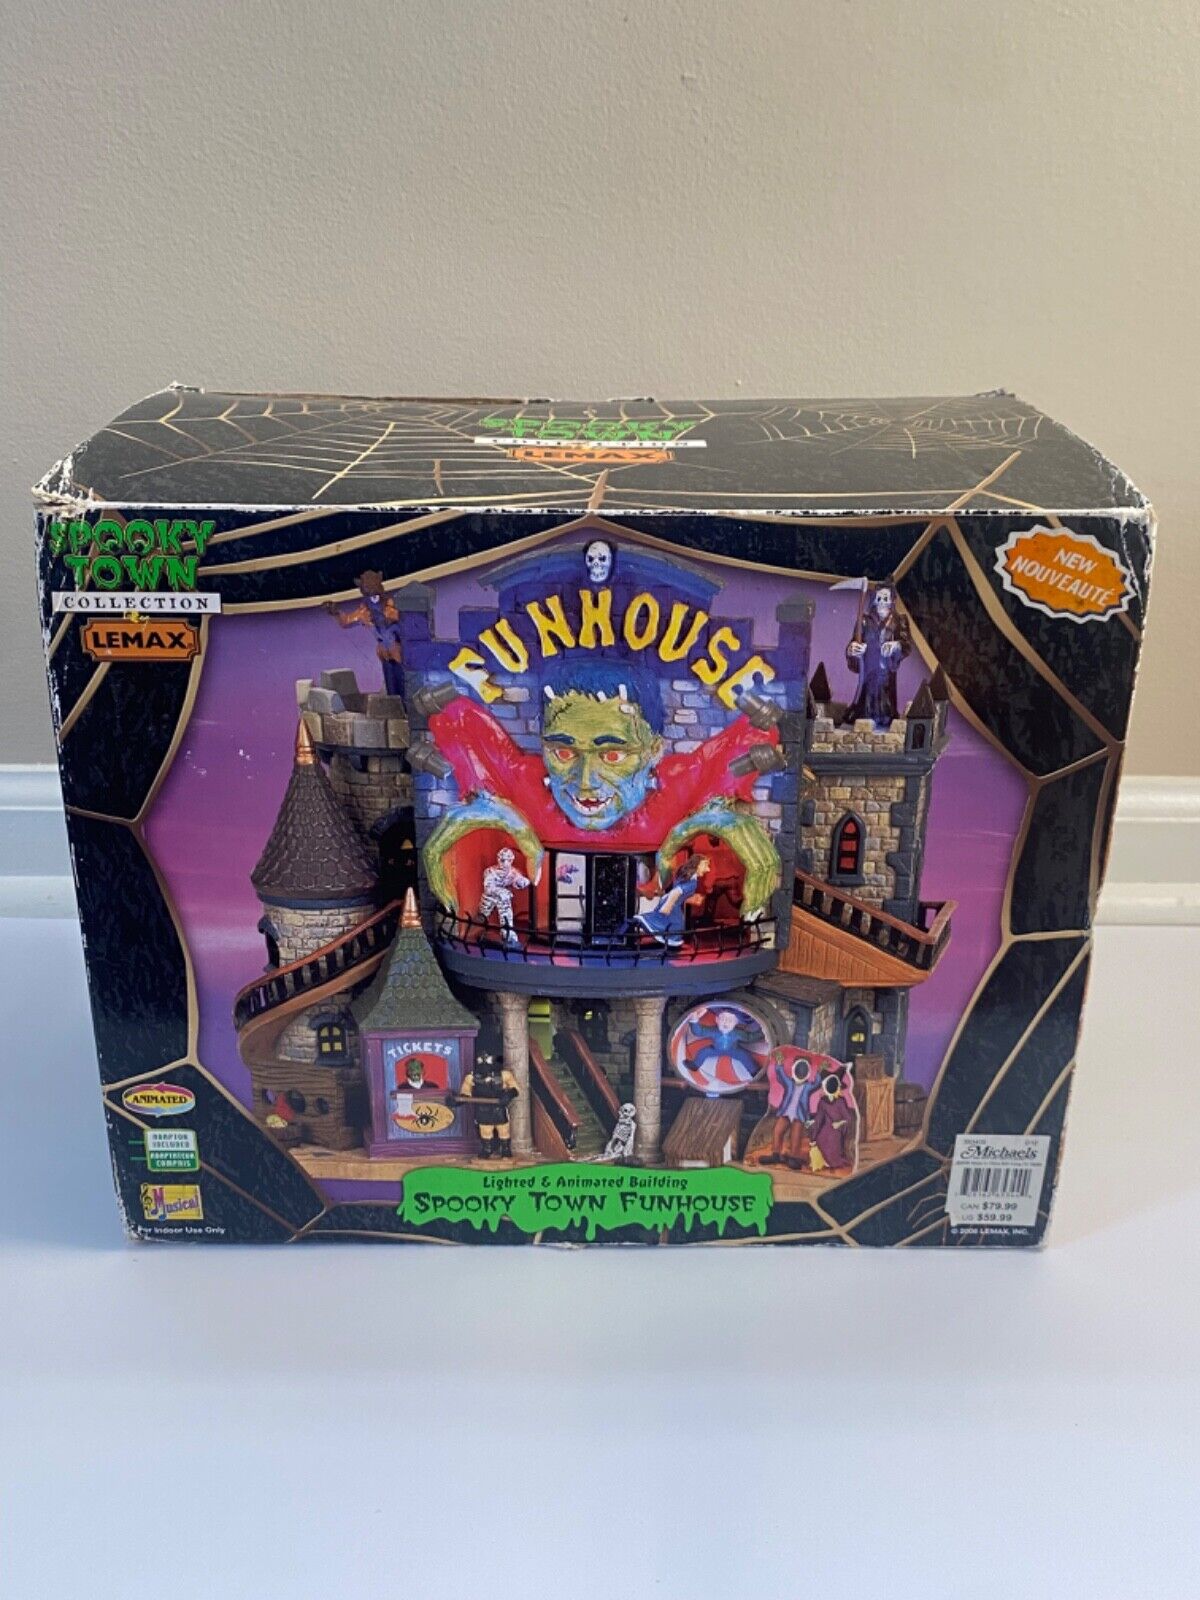 Lemax spooky town 2006 funhouse in box- no lights, sounds or motion